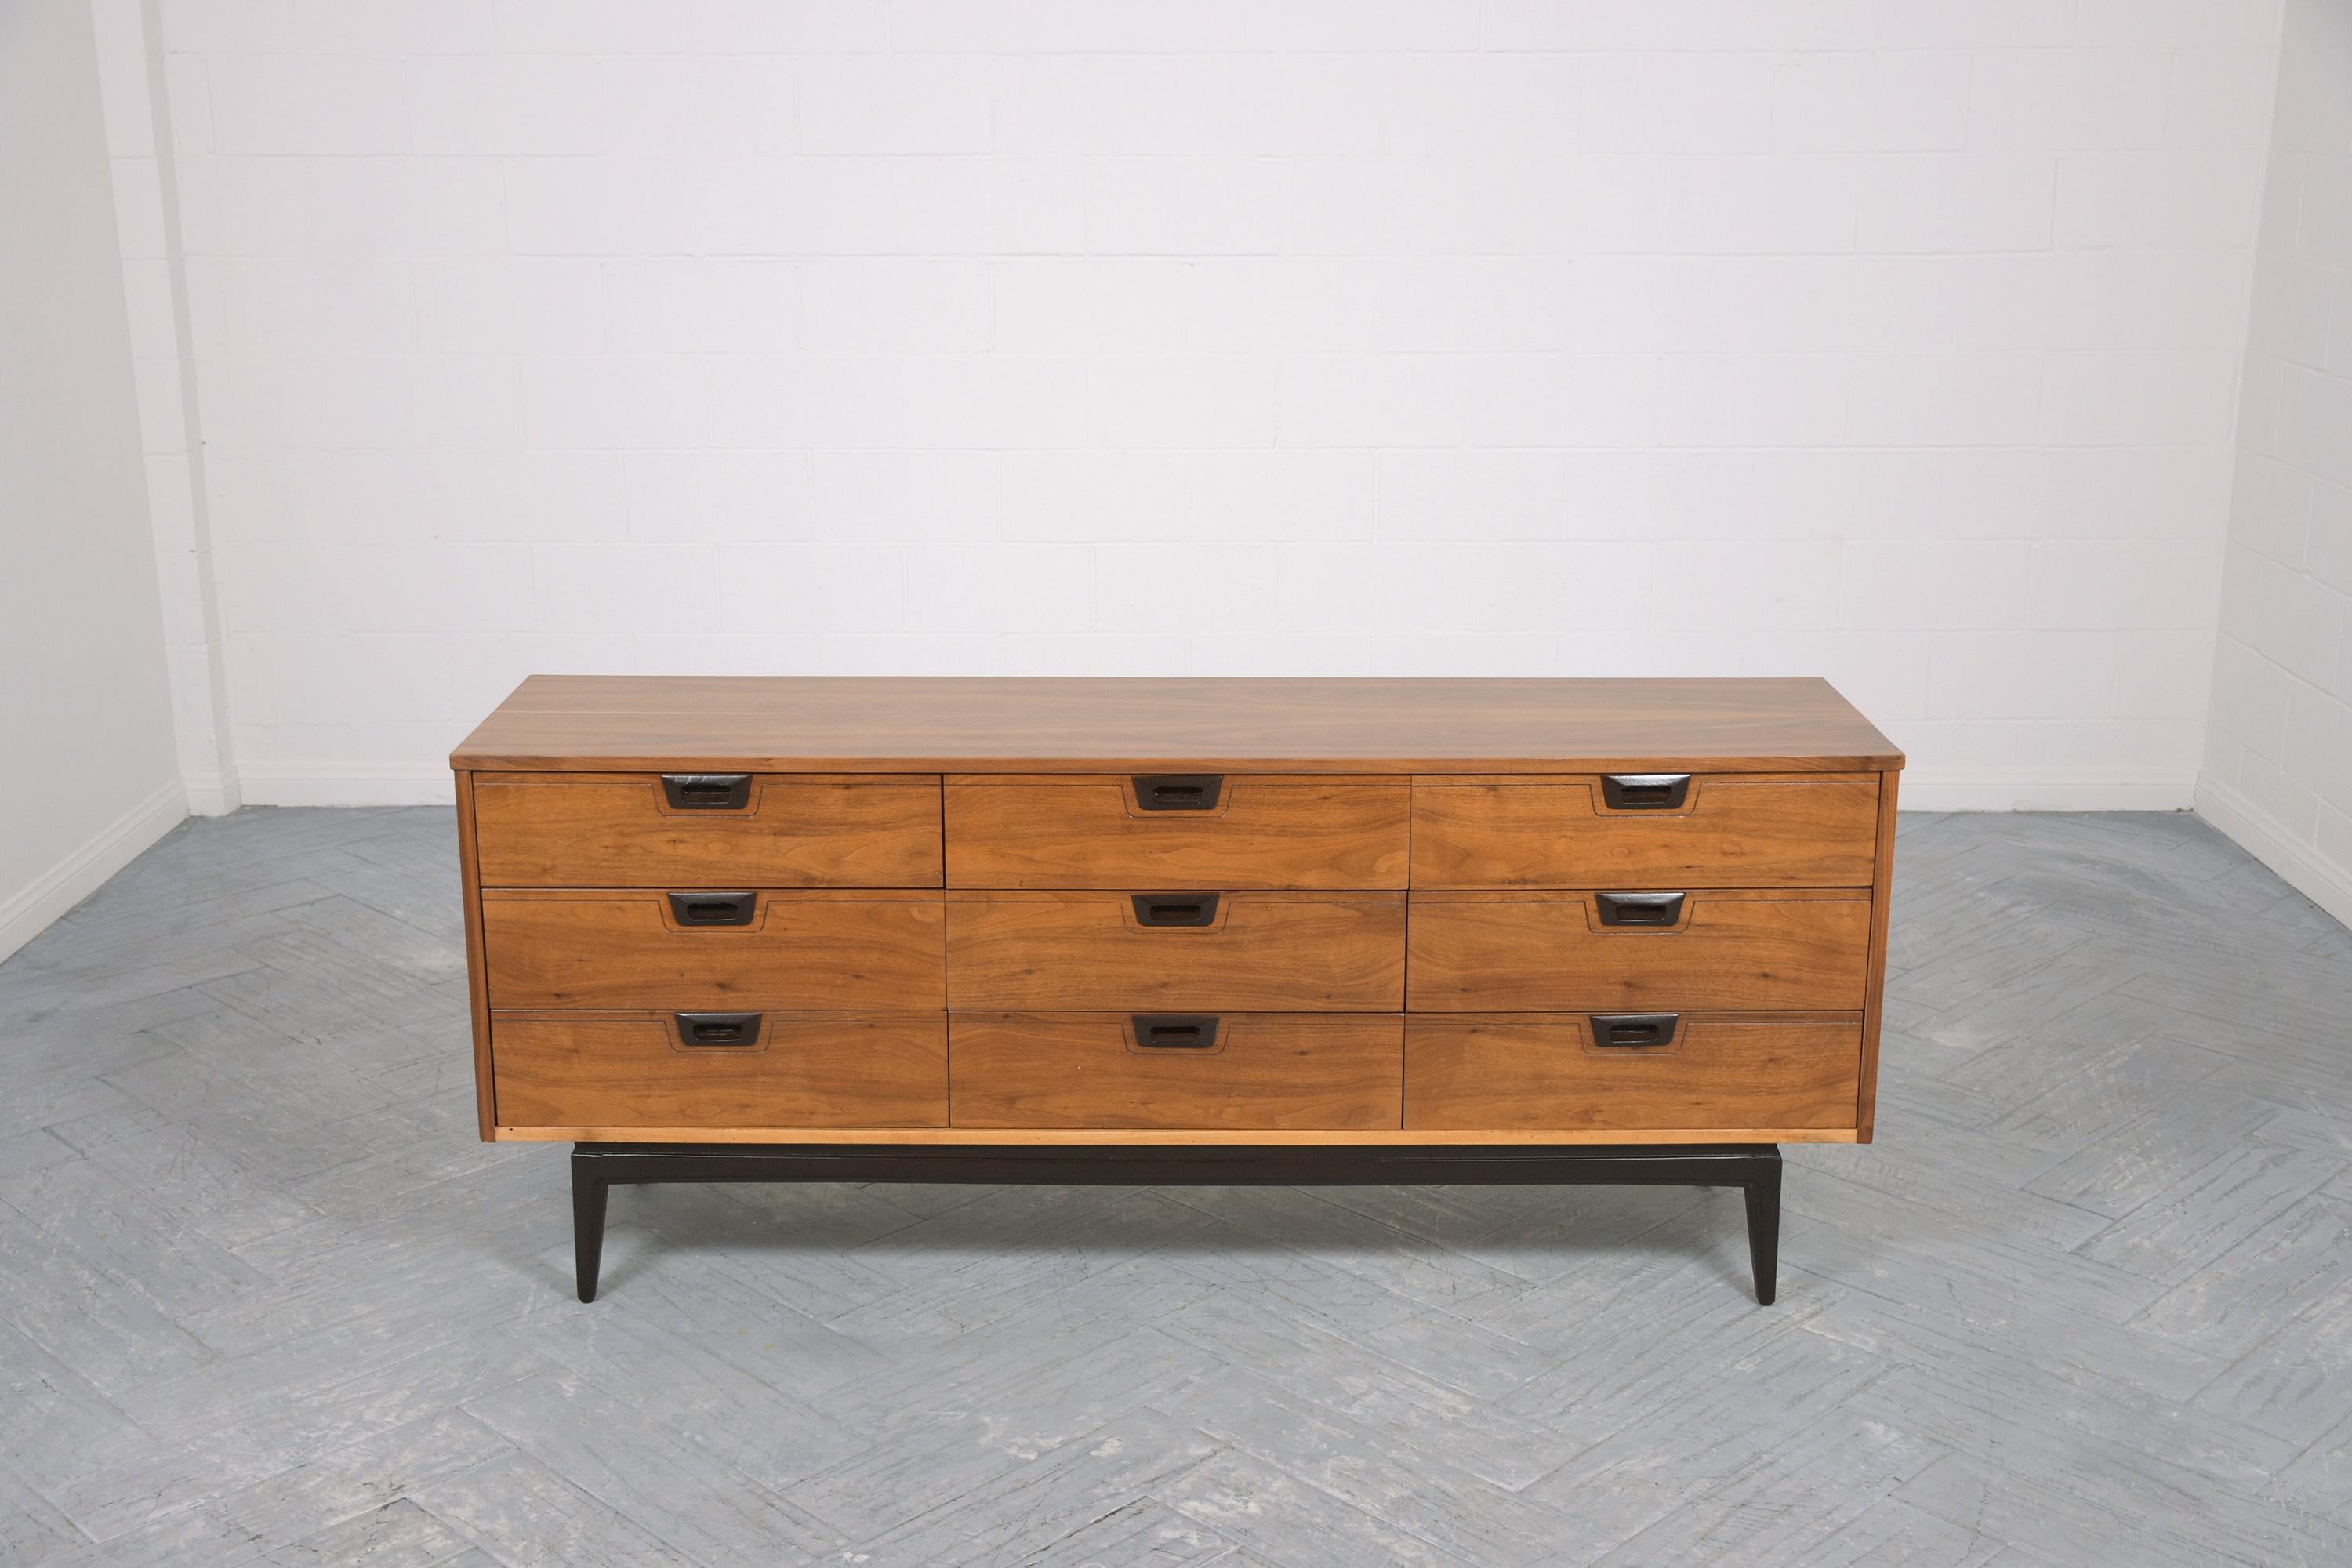 An extraordinary 1960s Mid-Century Modern walnut credenza in great condition is hand-crafted out of walnut wood and has been newly restored by our professional craftsmen team. This vintage dresser has a sleek design and is newly refinished in walnut